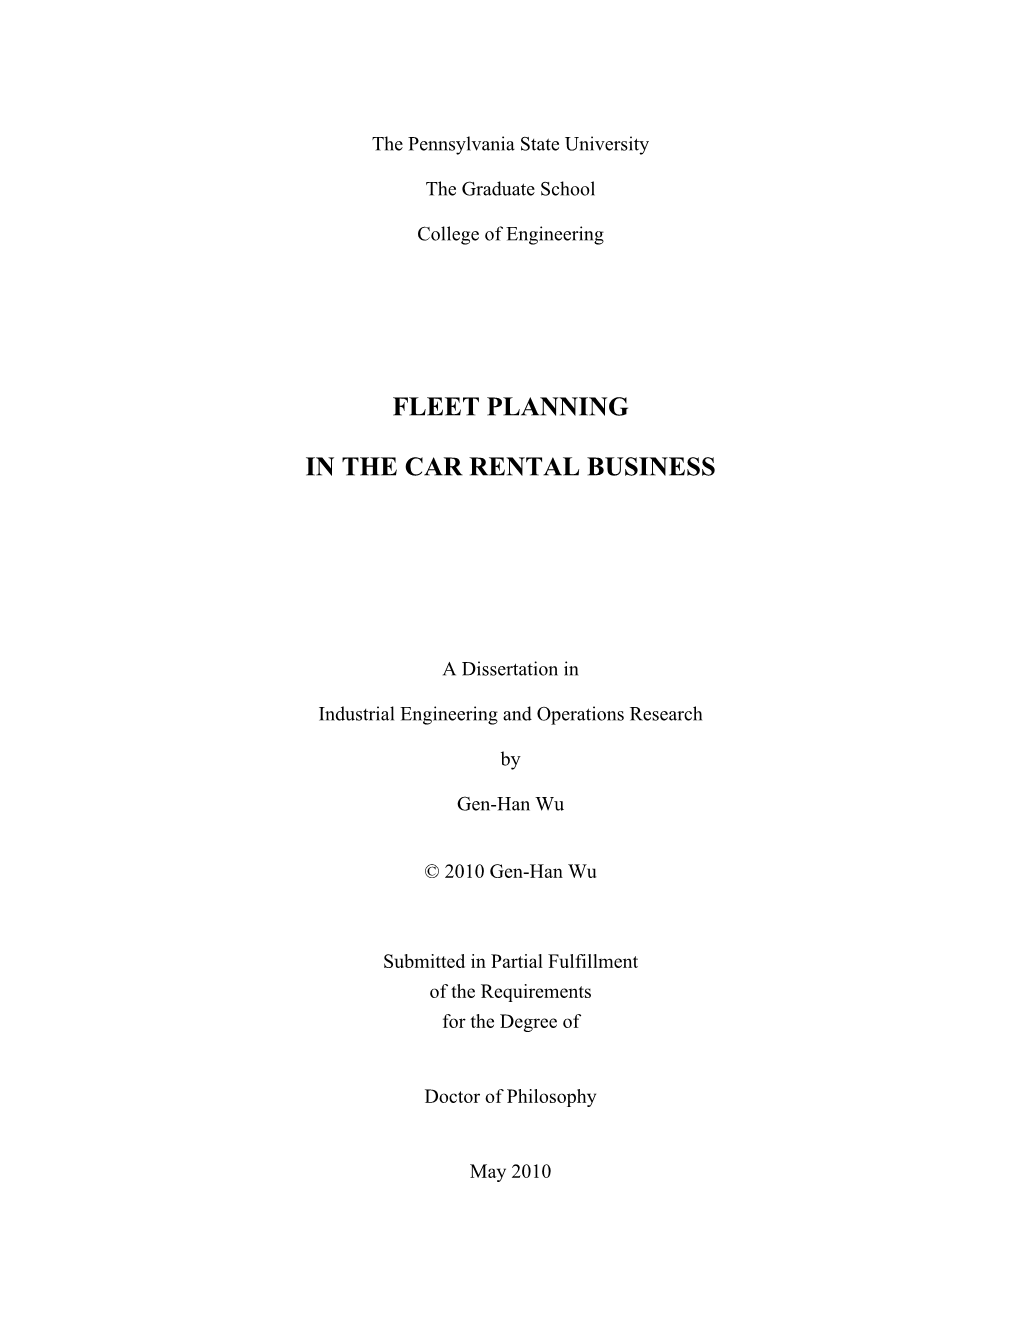 Fleet Planning in the Car Rental Business Is Discussed Only Minimally in Operations Research